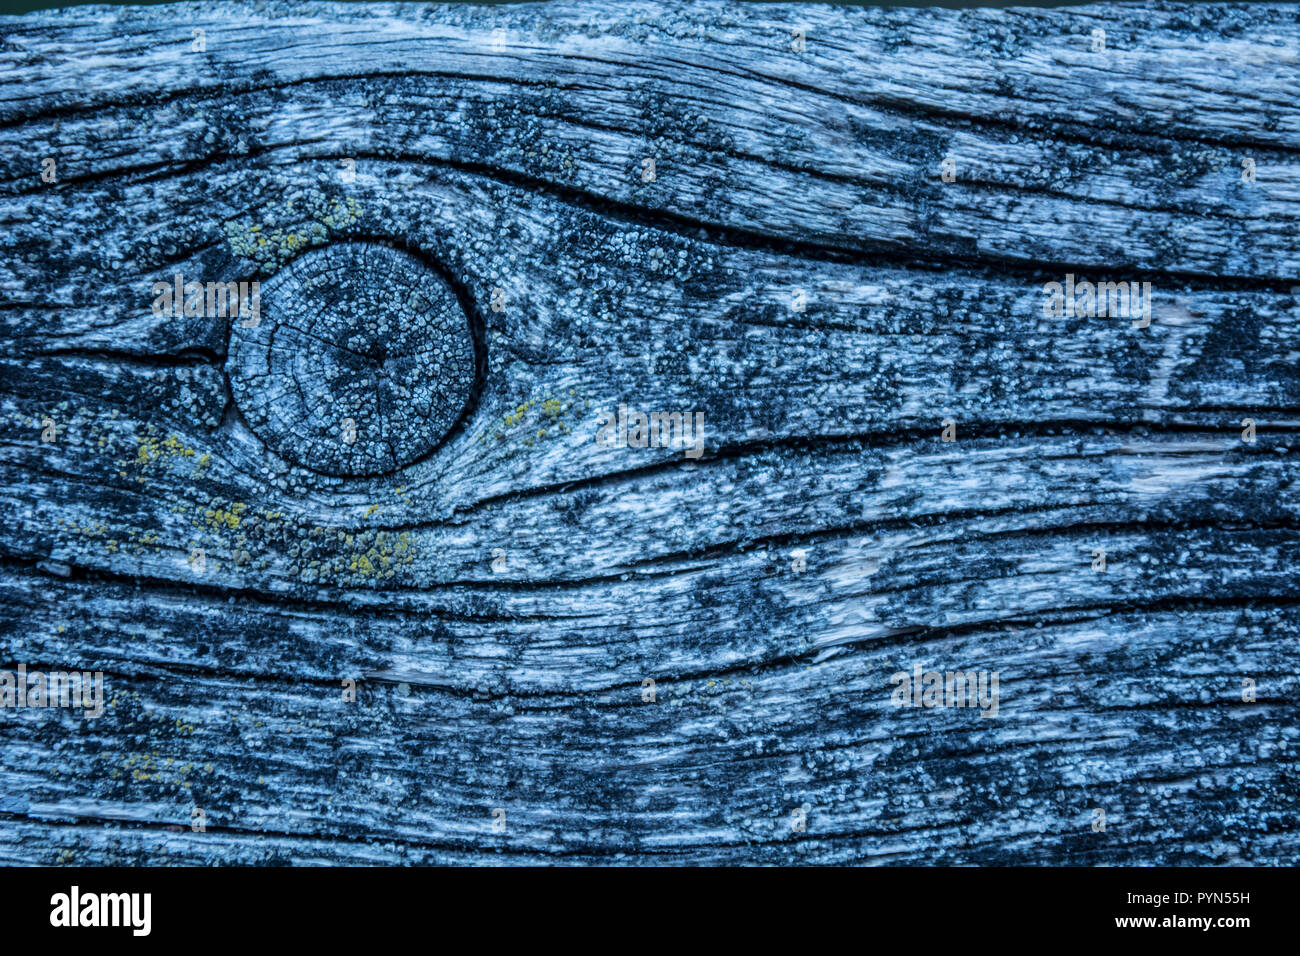 Blue realistic old wood textures Stock Photo